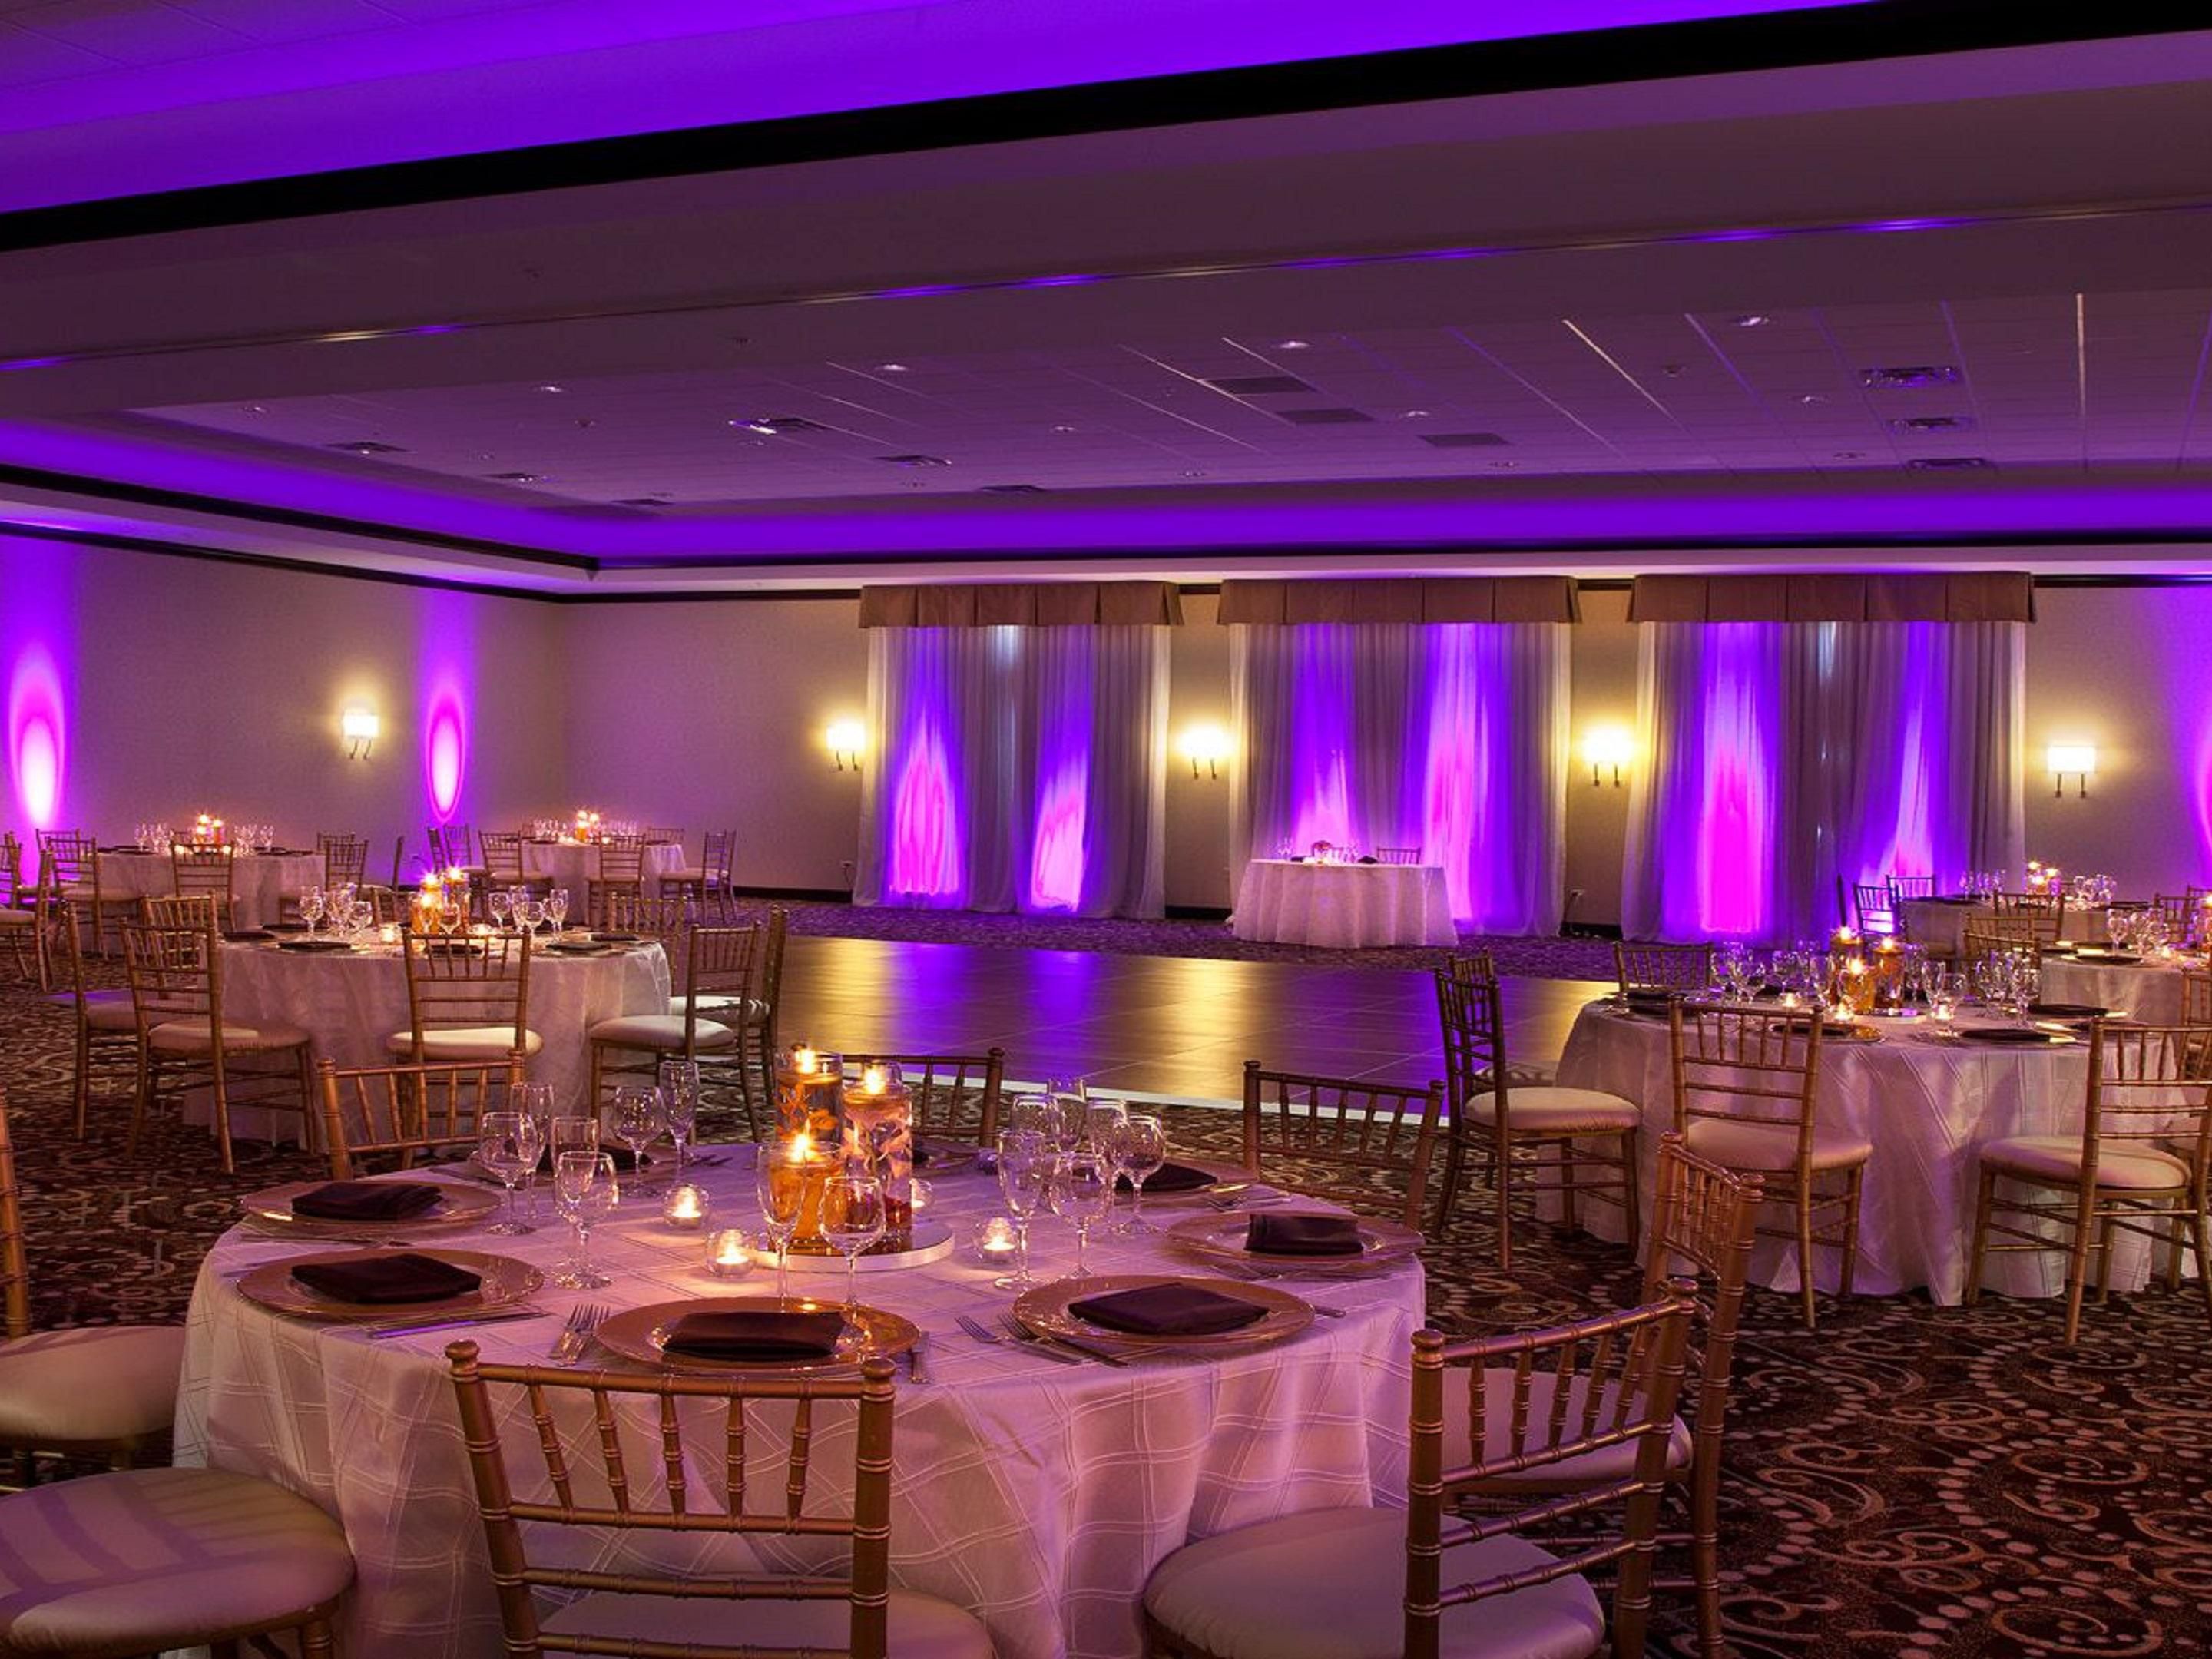 The Holiday Inn hosts many weddings throughout the year. Our ballroom can accommodate up to 800 people. Let us make your day one to remember.